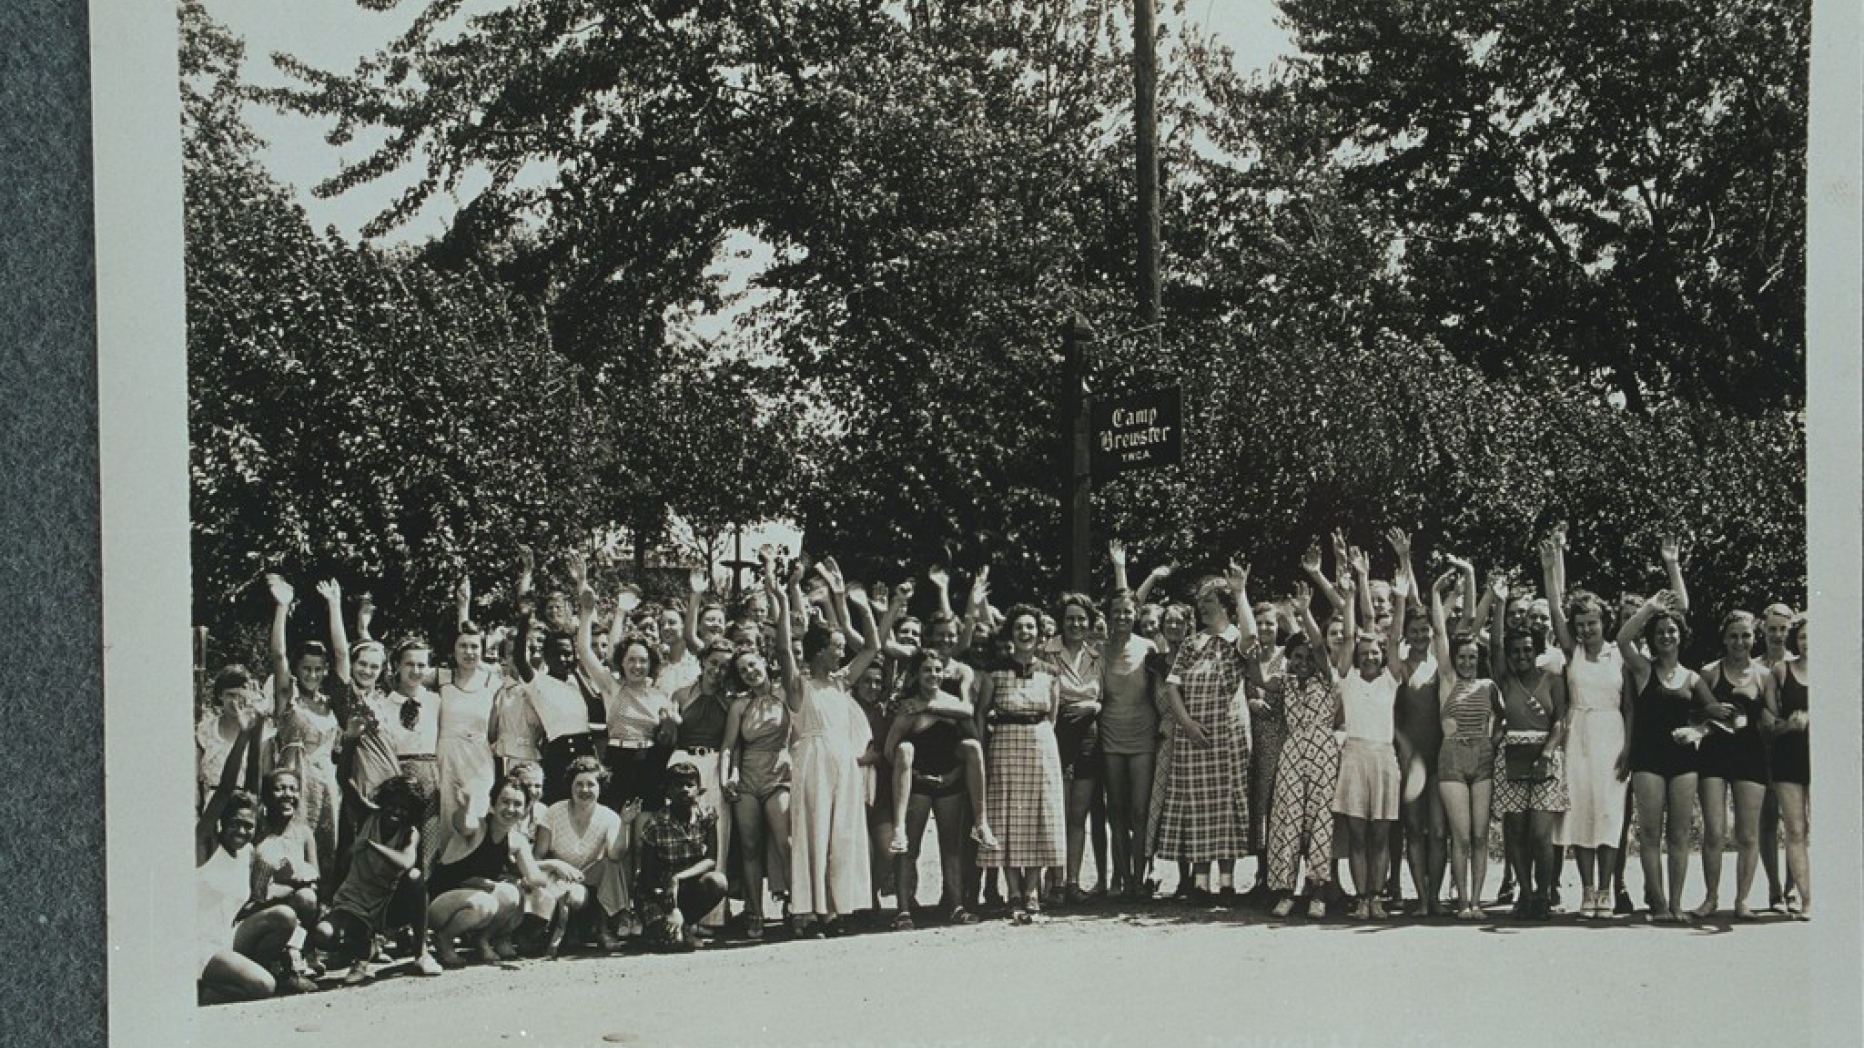 B&W photo of group of young women throwing their arms up in the air for a group photo